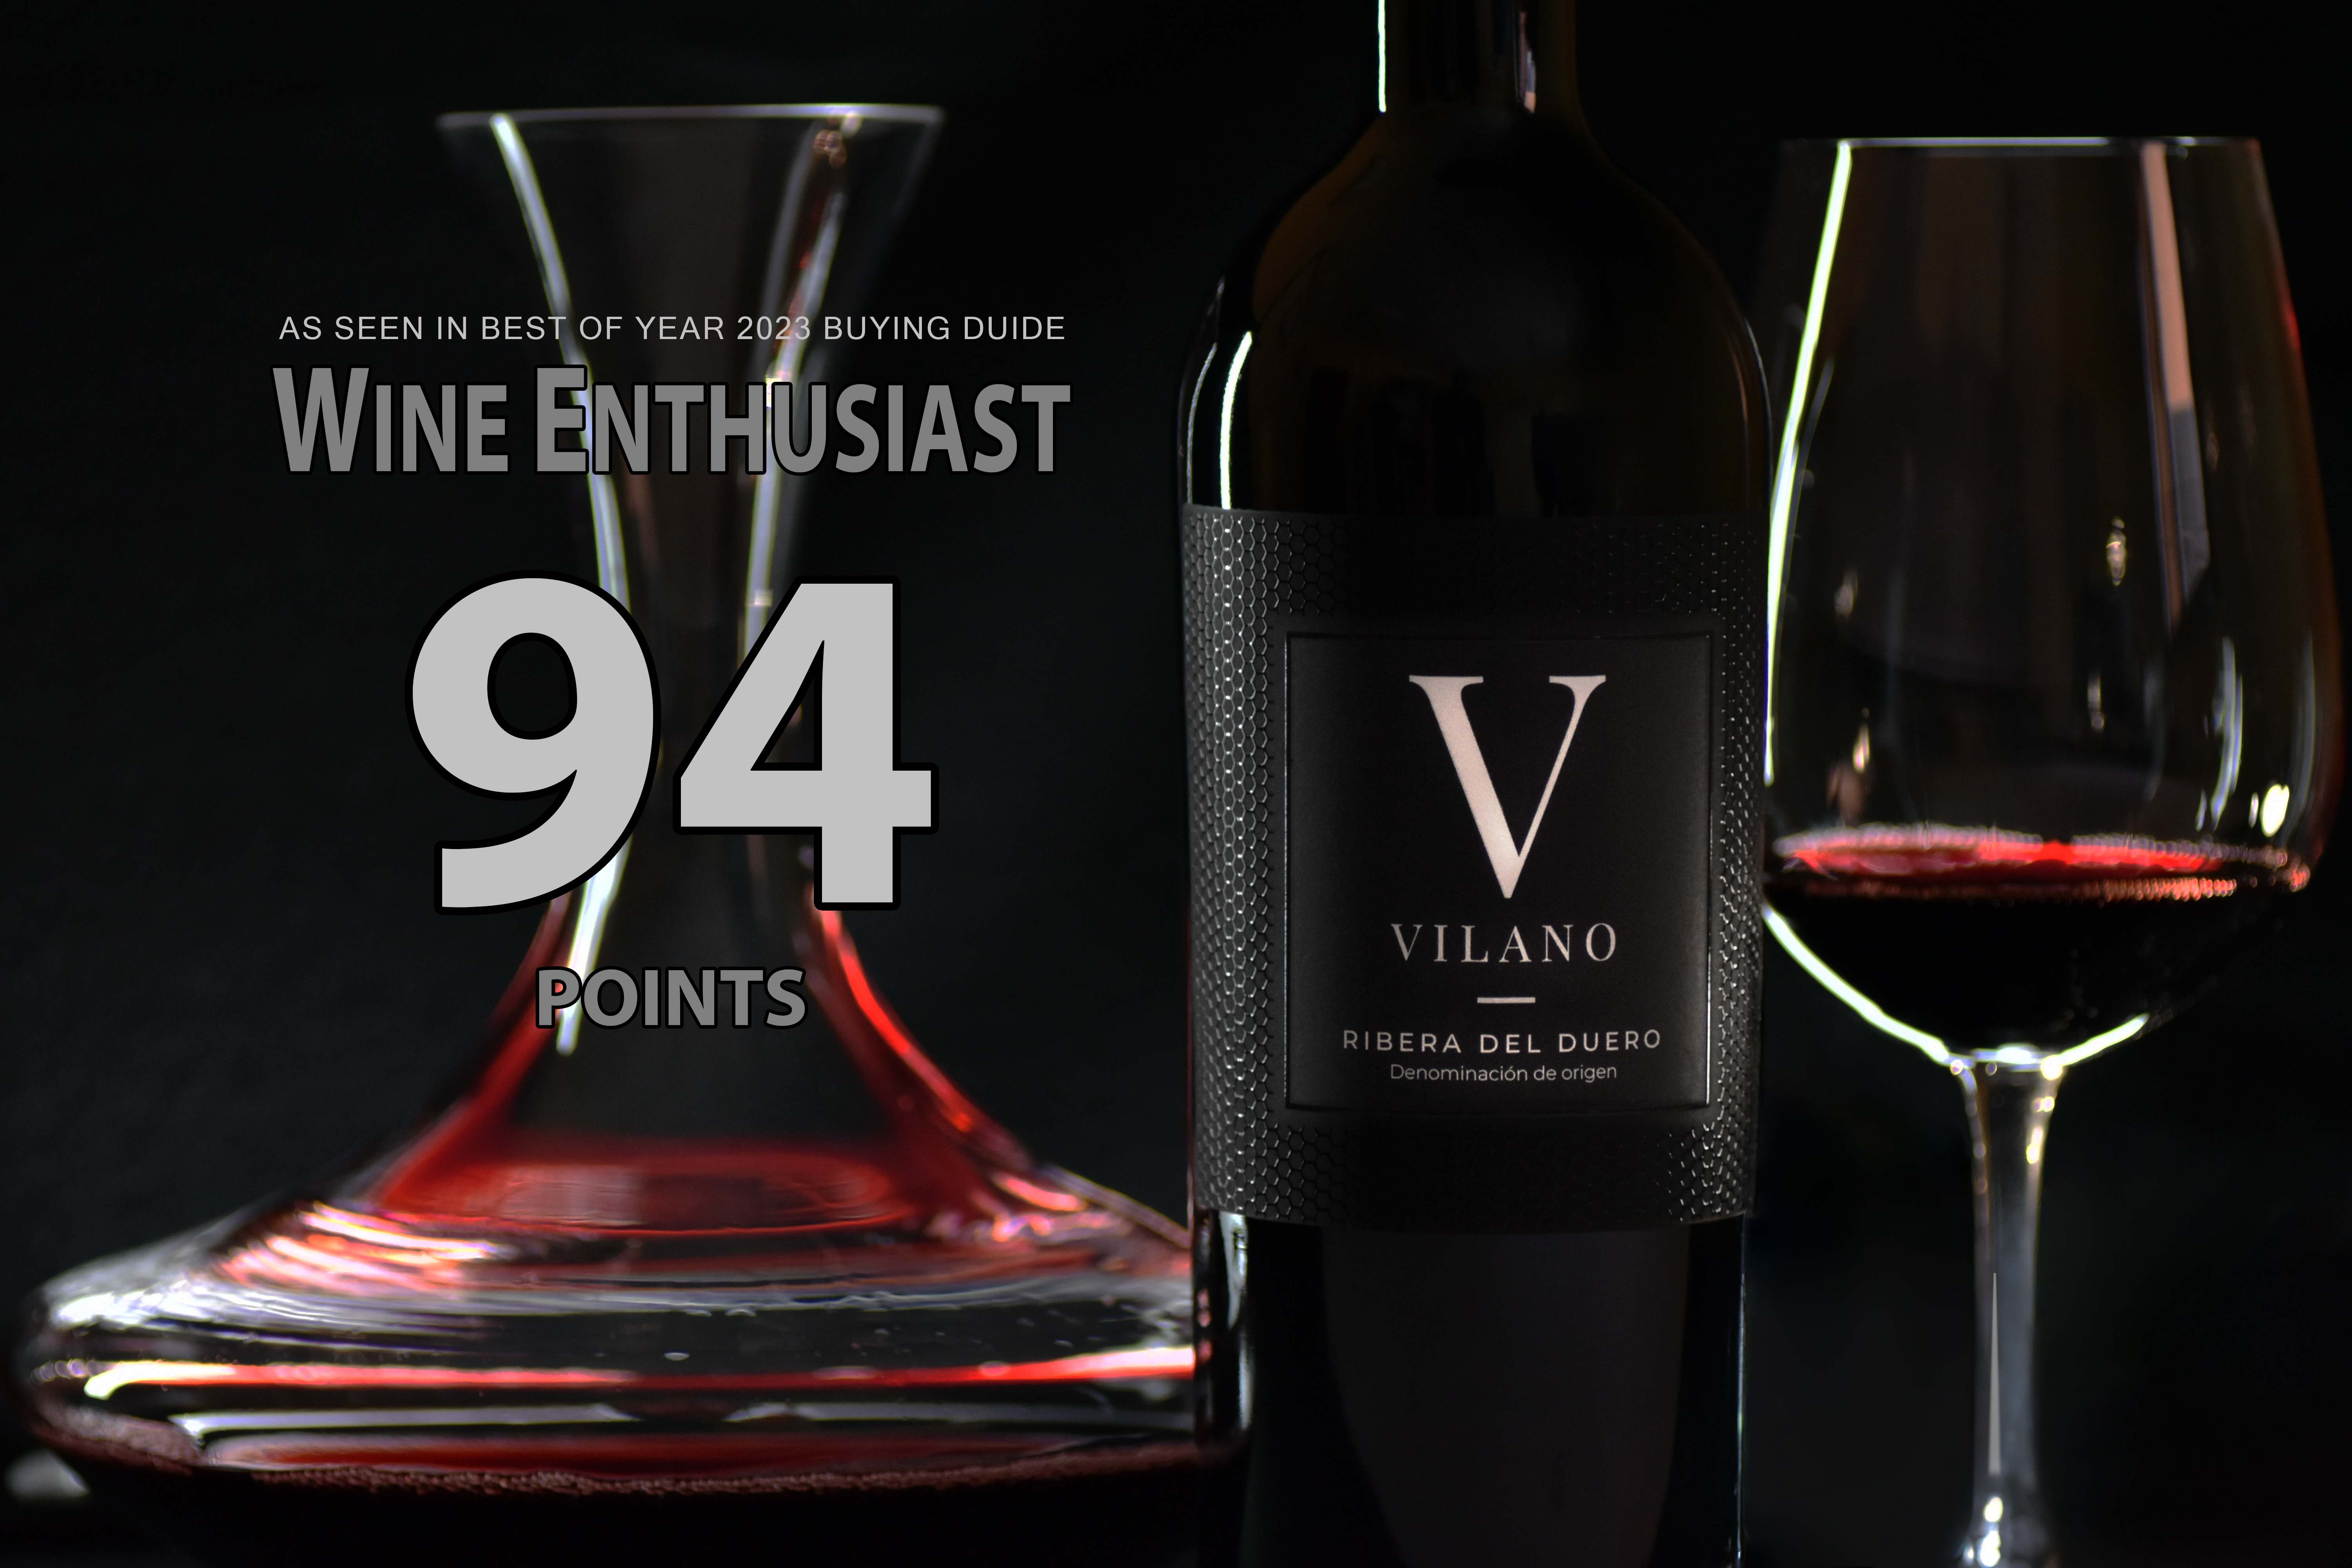 Vilano, among the best wines of the year, according to Wine Enthusiast